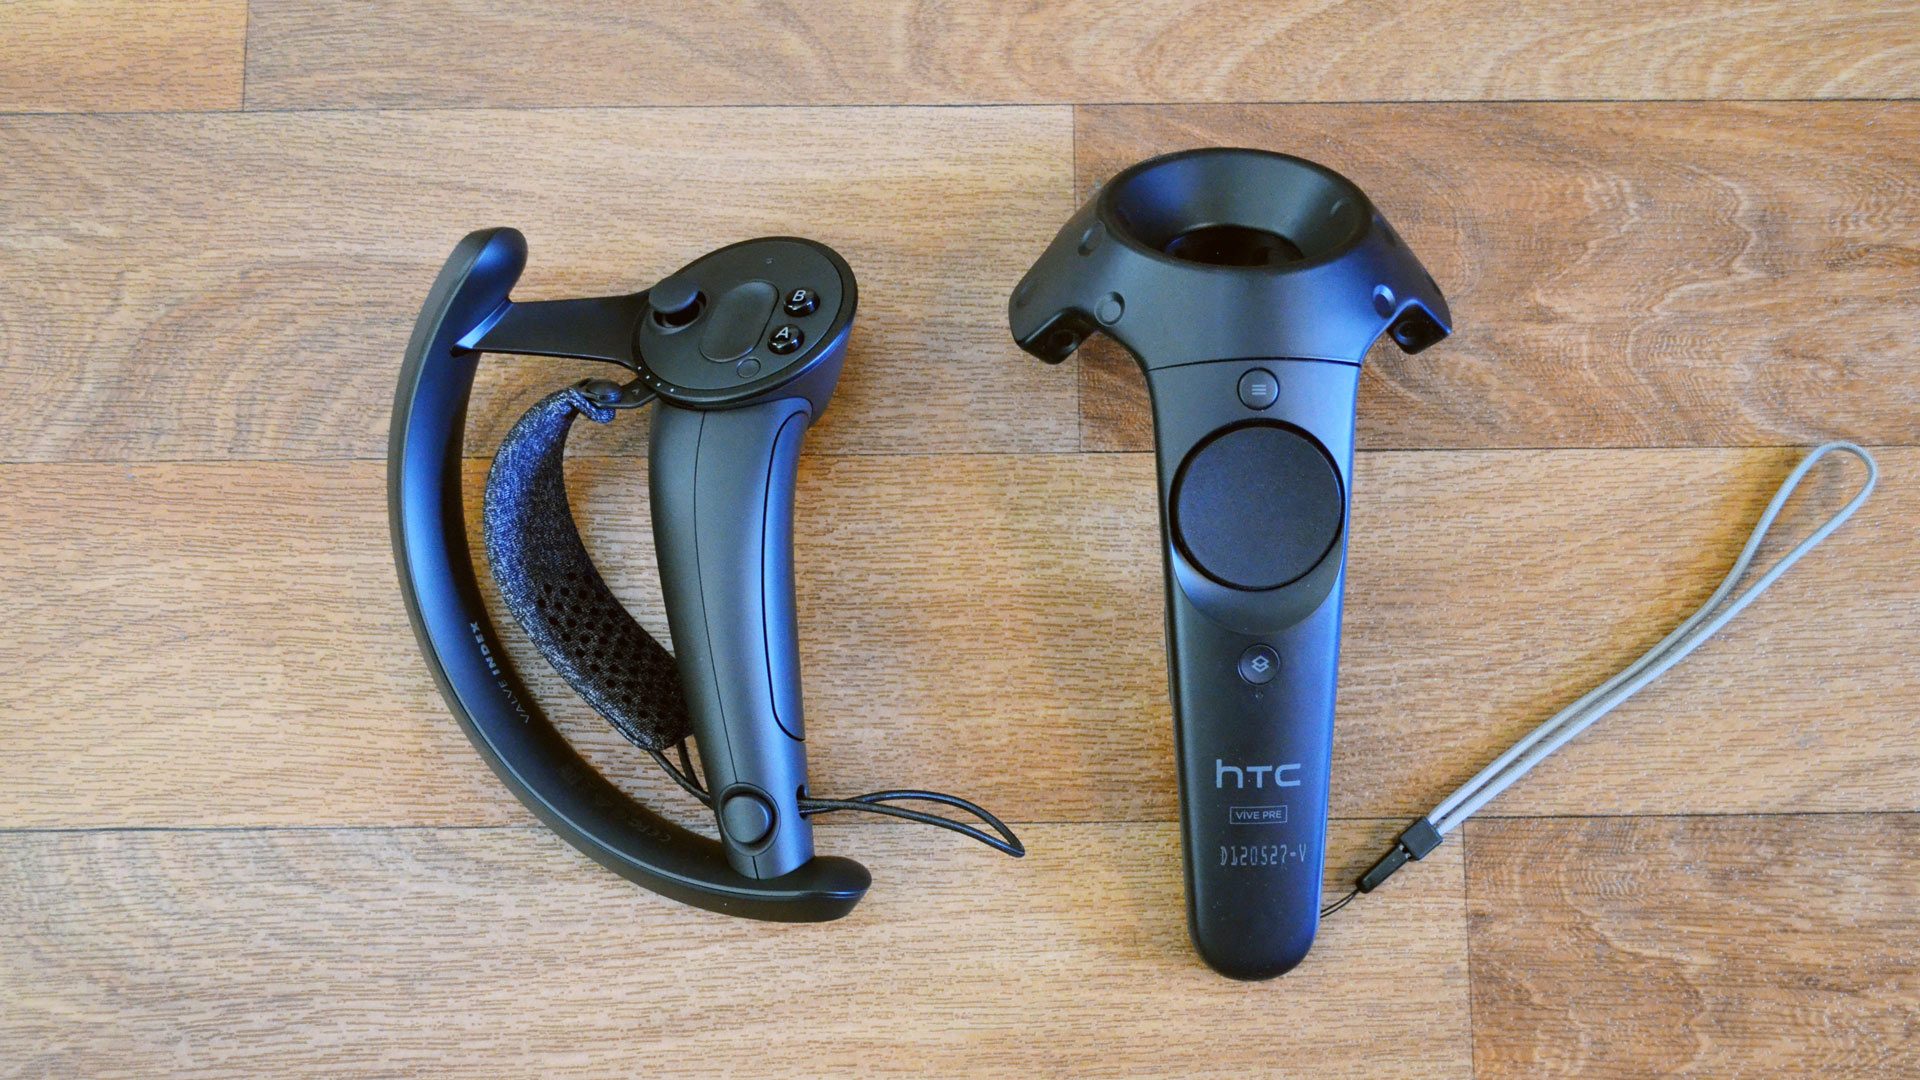 Valve – The Enthusiast's in VR Headsets